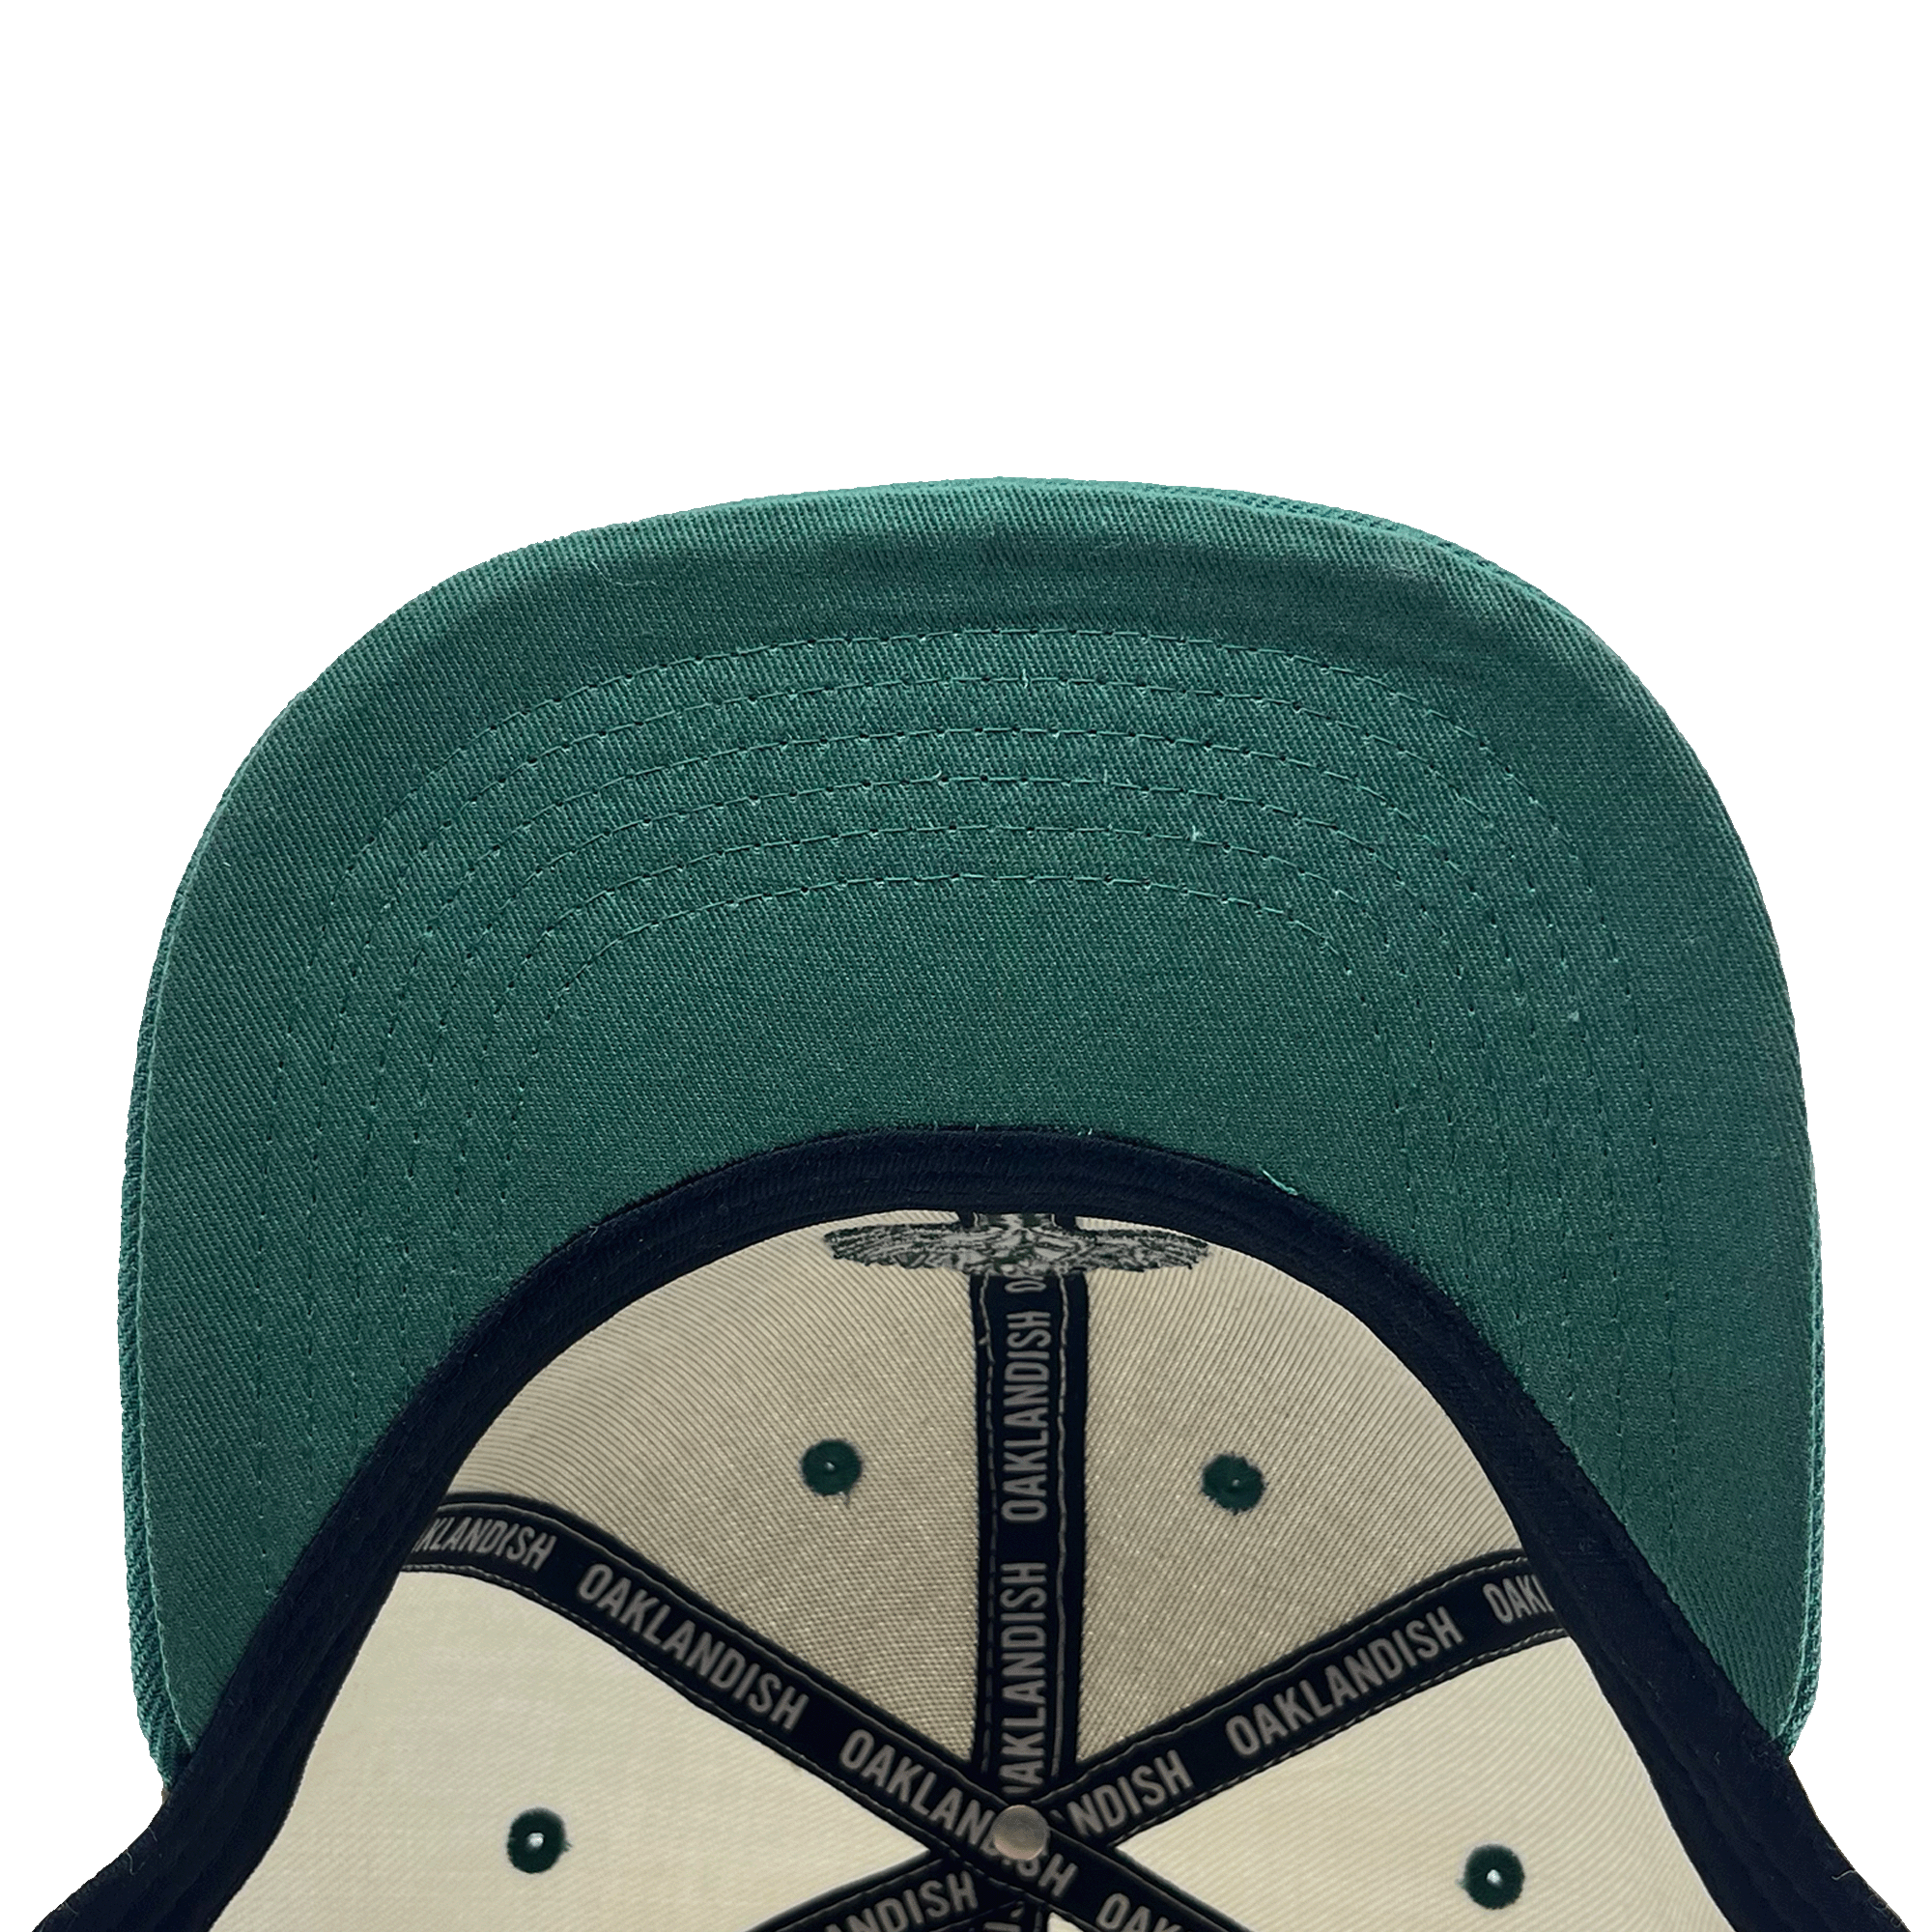 View of the underside of the green bill on a white cap with black striping and Oaklandish wordmark on repeat inside the crown.